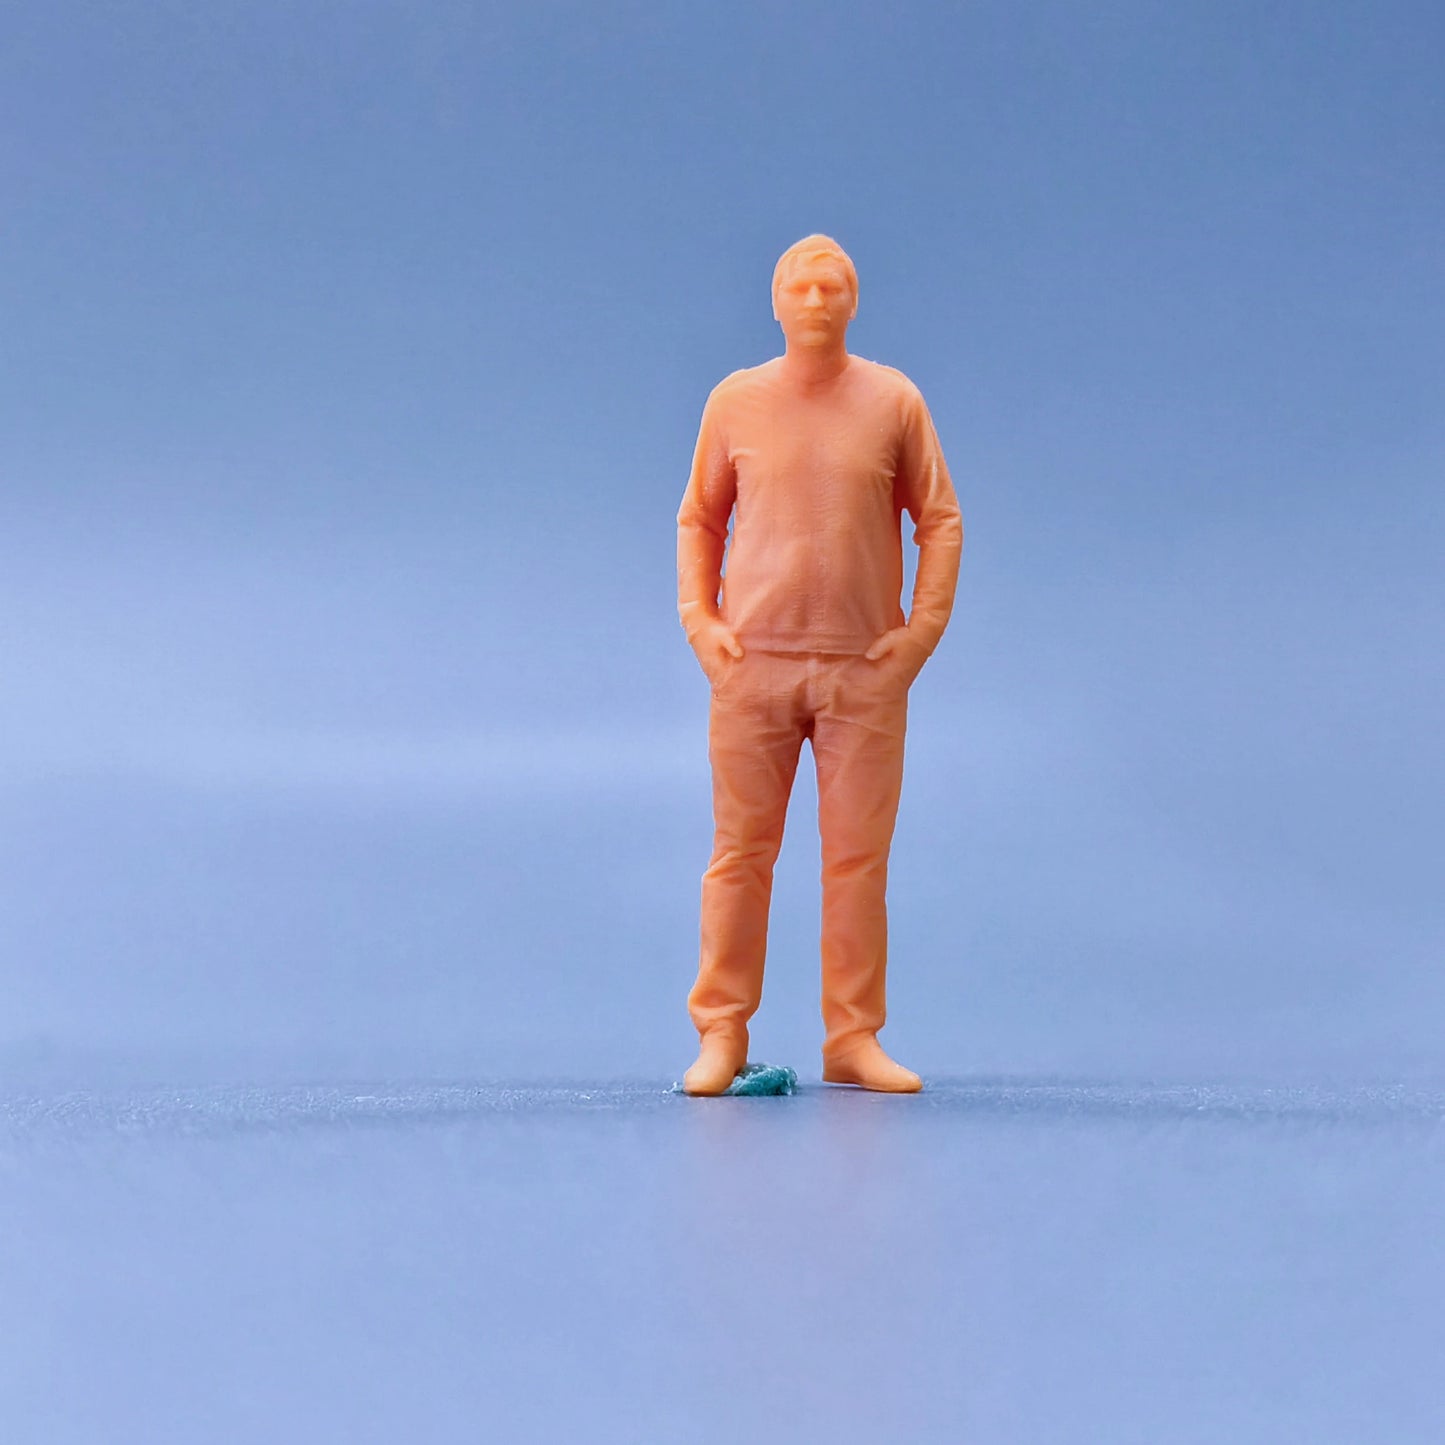 1/64 1/43 Figurines Scale Model Resin Standing Middle-aged Man Uncolored Miniatures Diorama Hand-painted L117